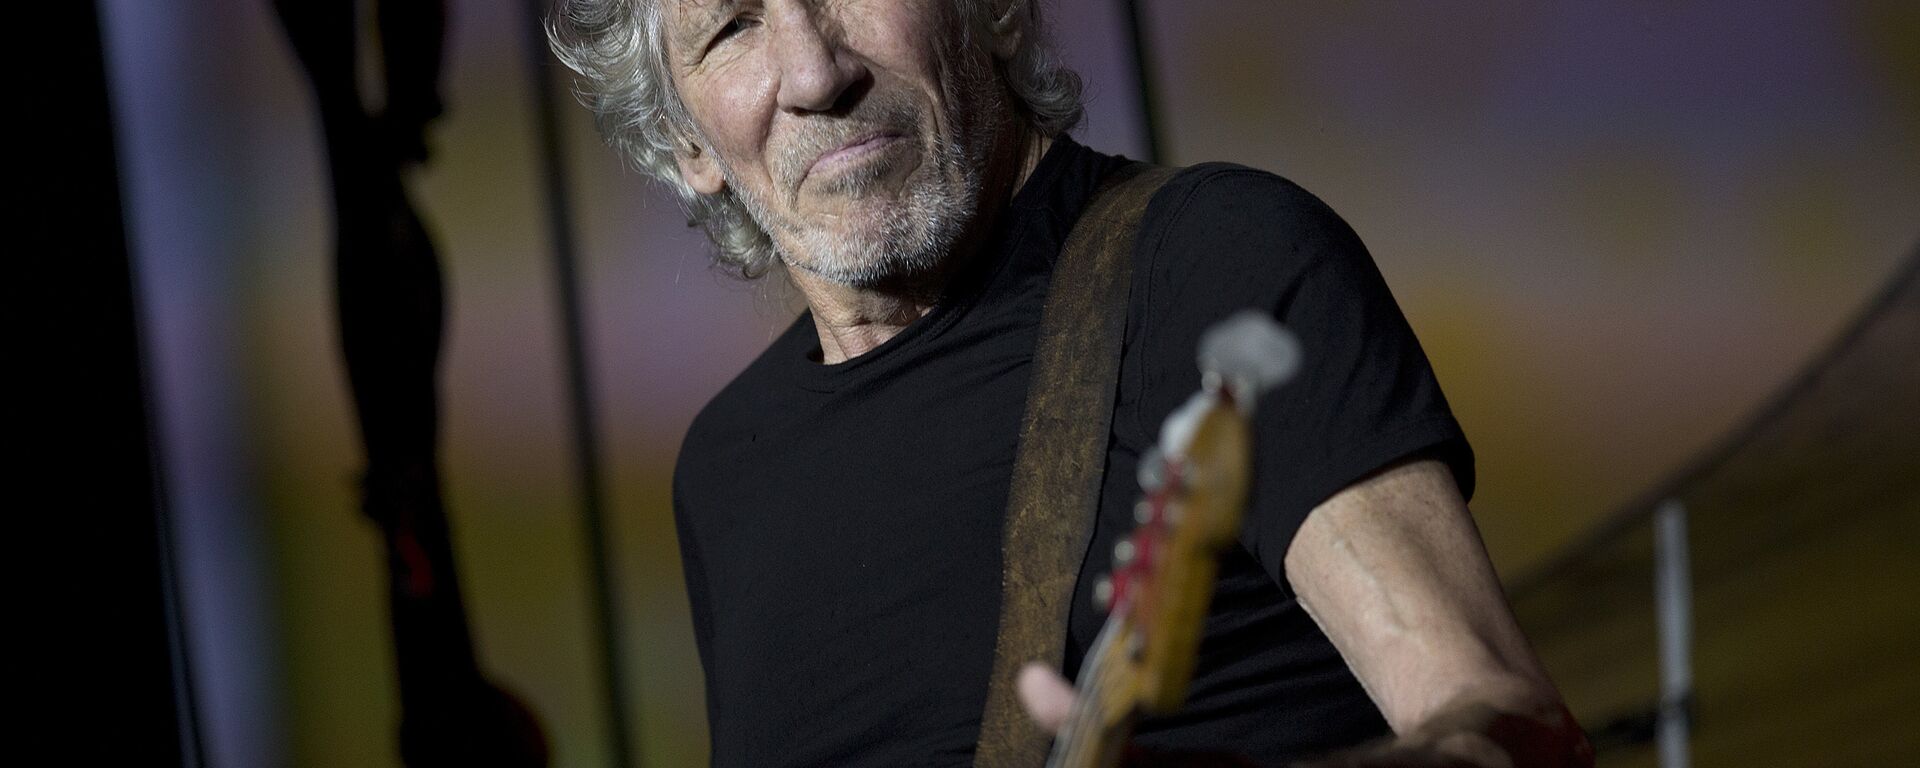 British singer and songwriter Roger Waters performs during his concert of the Us+Them tour at Maracana stadium, Rio de Janeiro, Brazil, Wednesday, Oct. 24, 2018 - Sputnik International, 1920, 22.08.2022